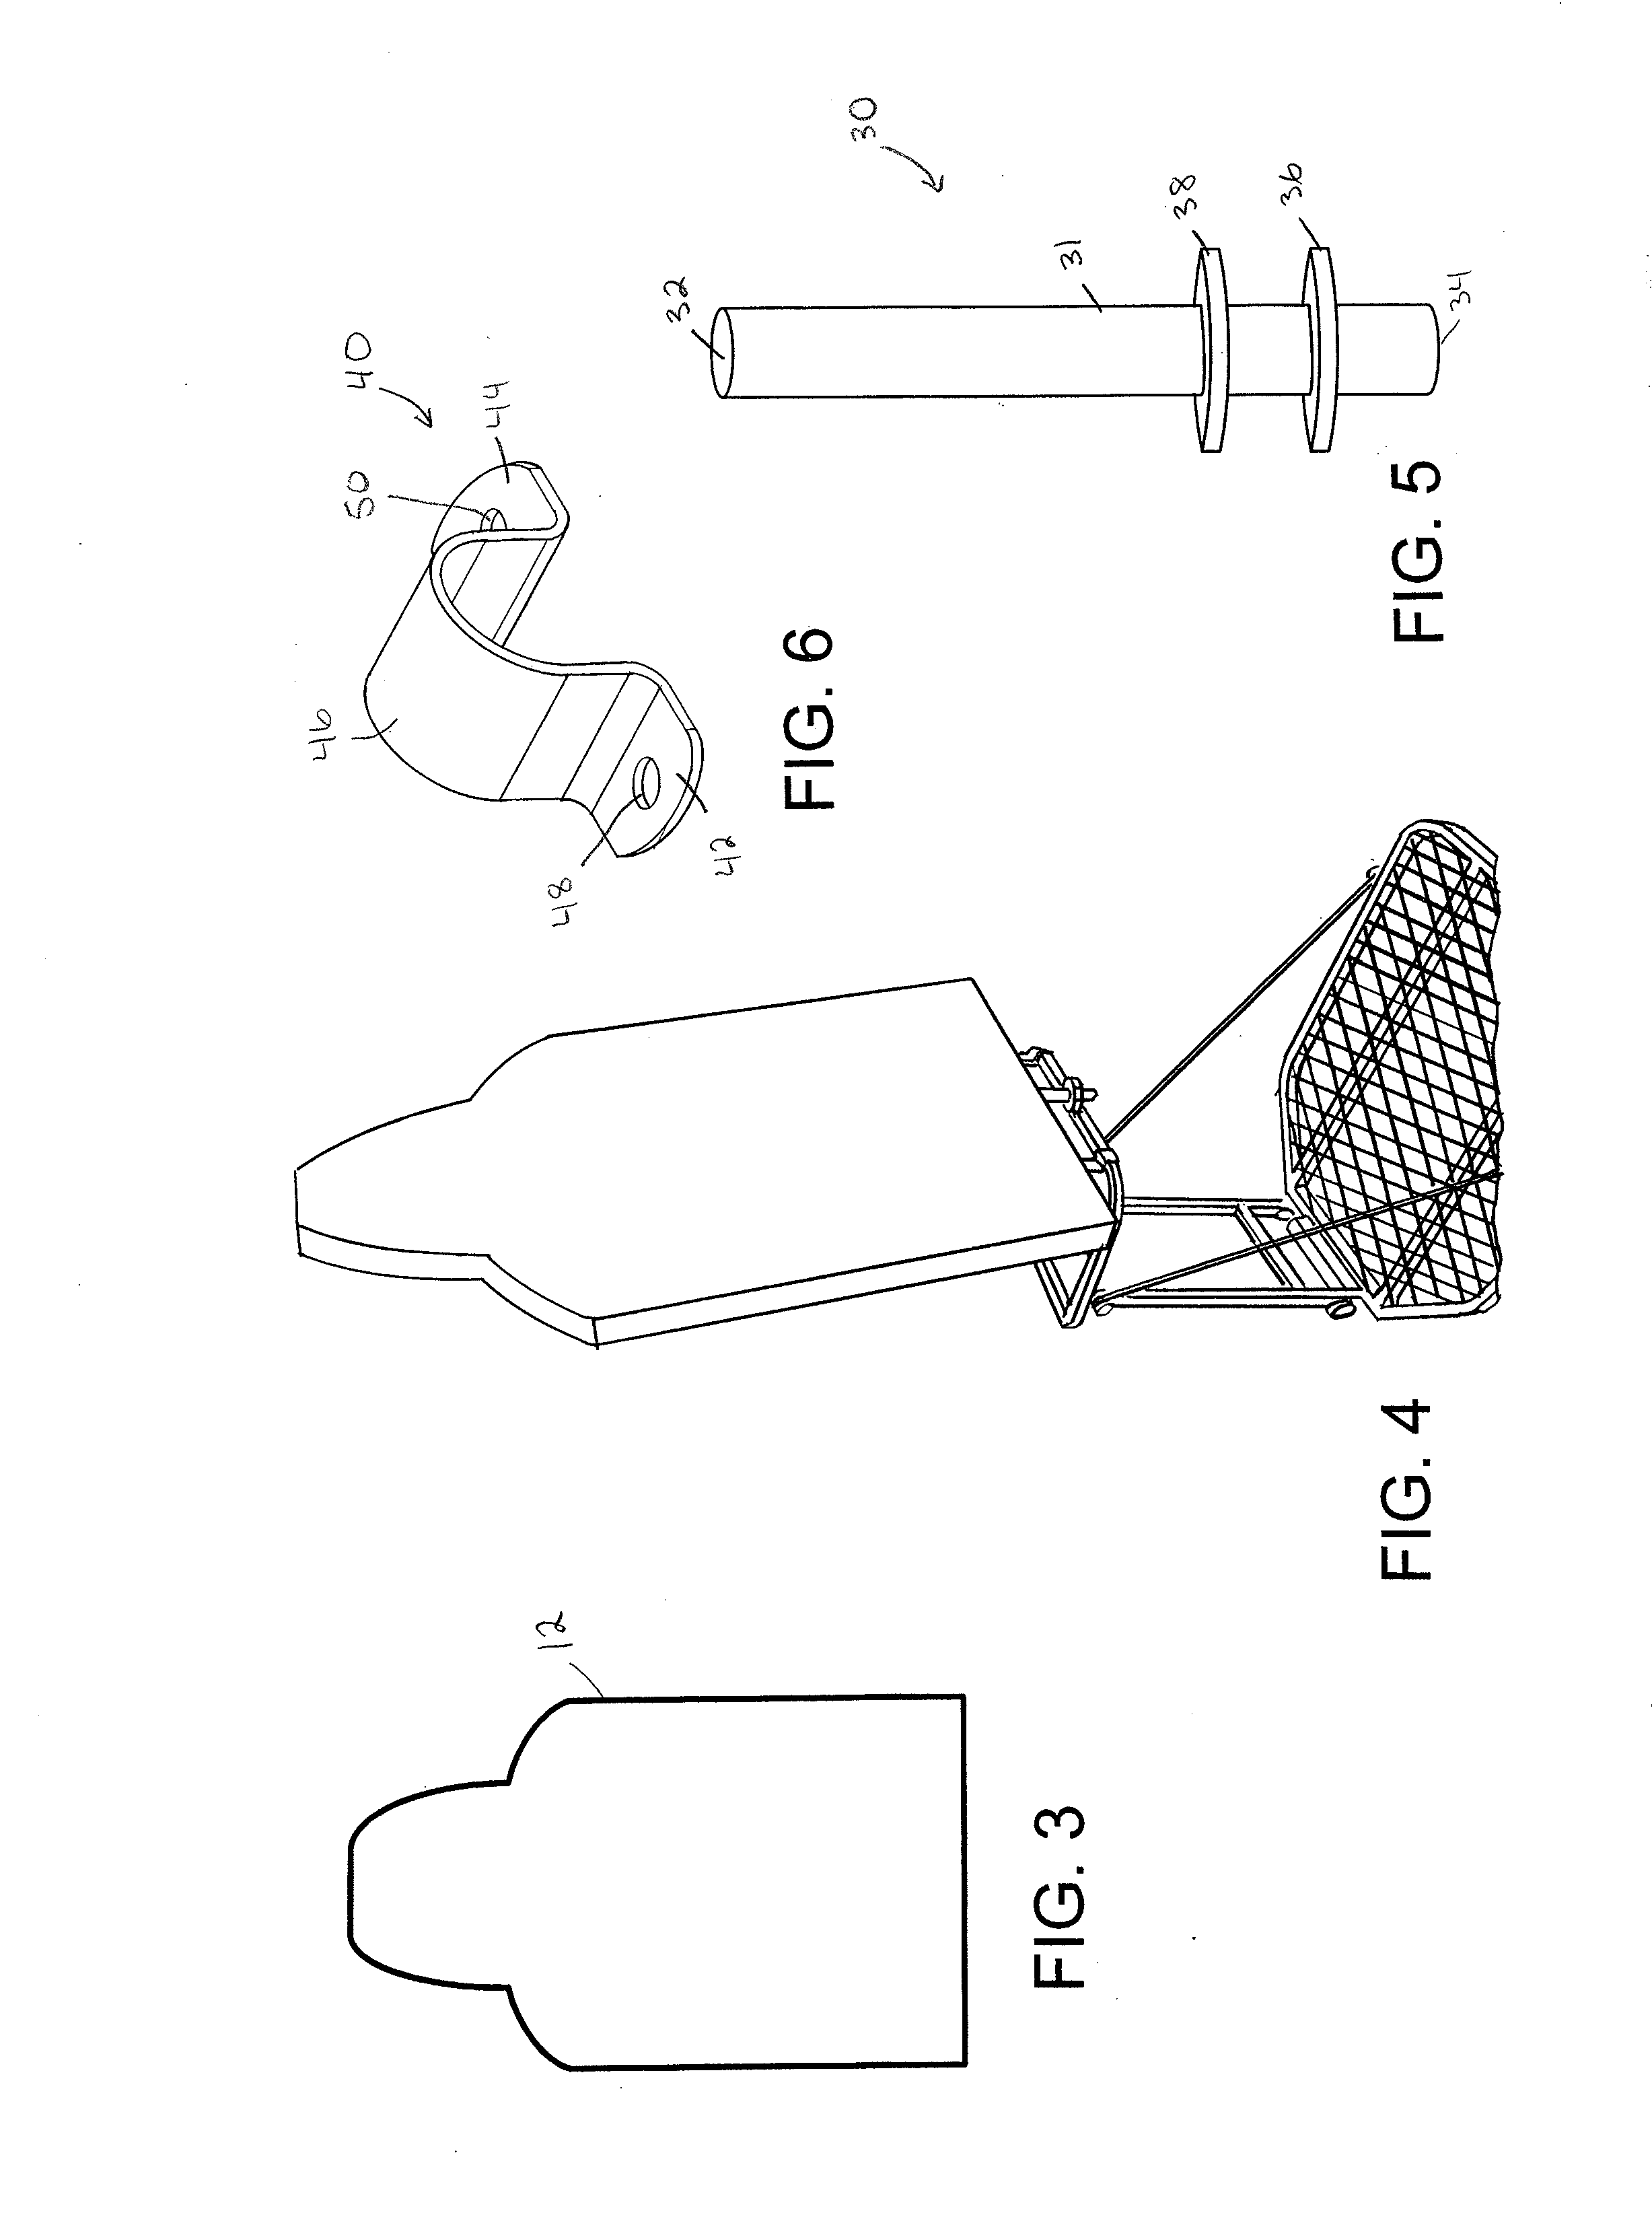 Animal conditioning device